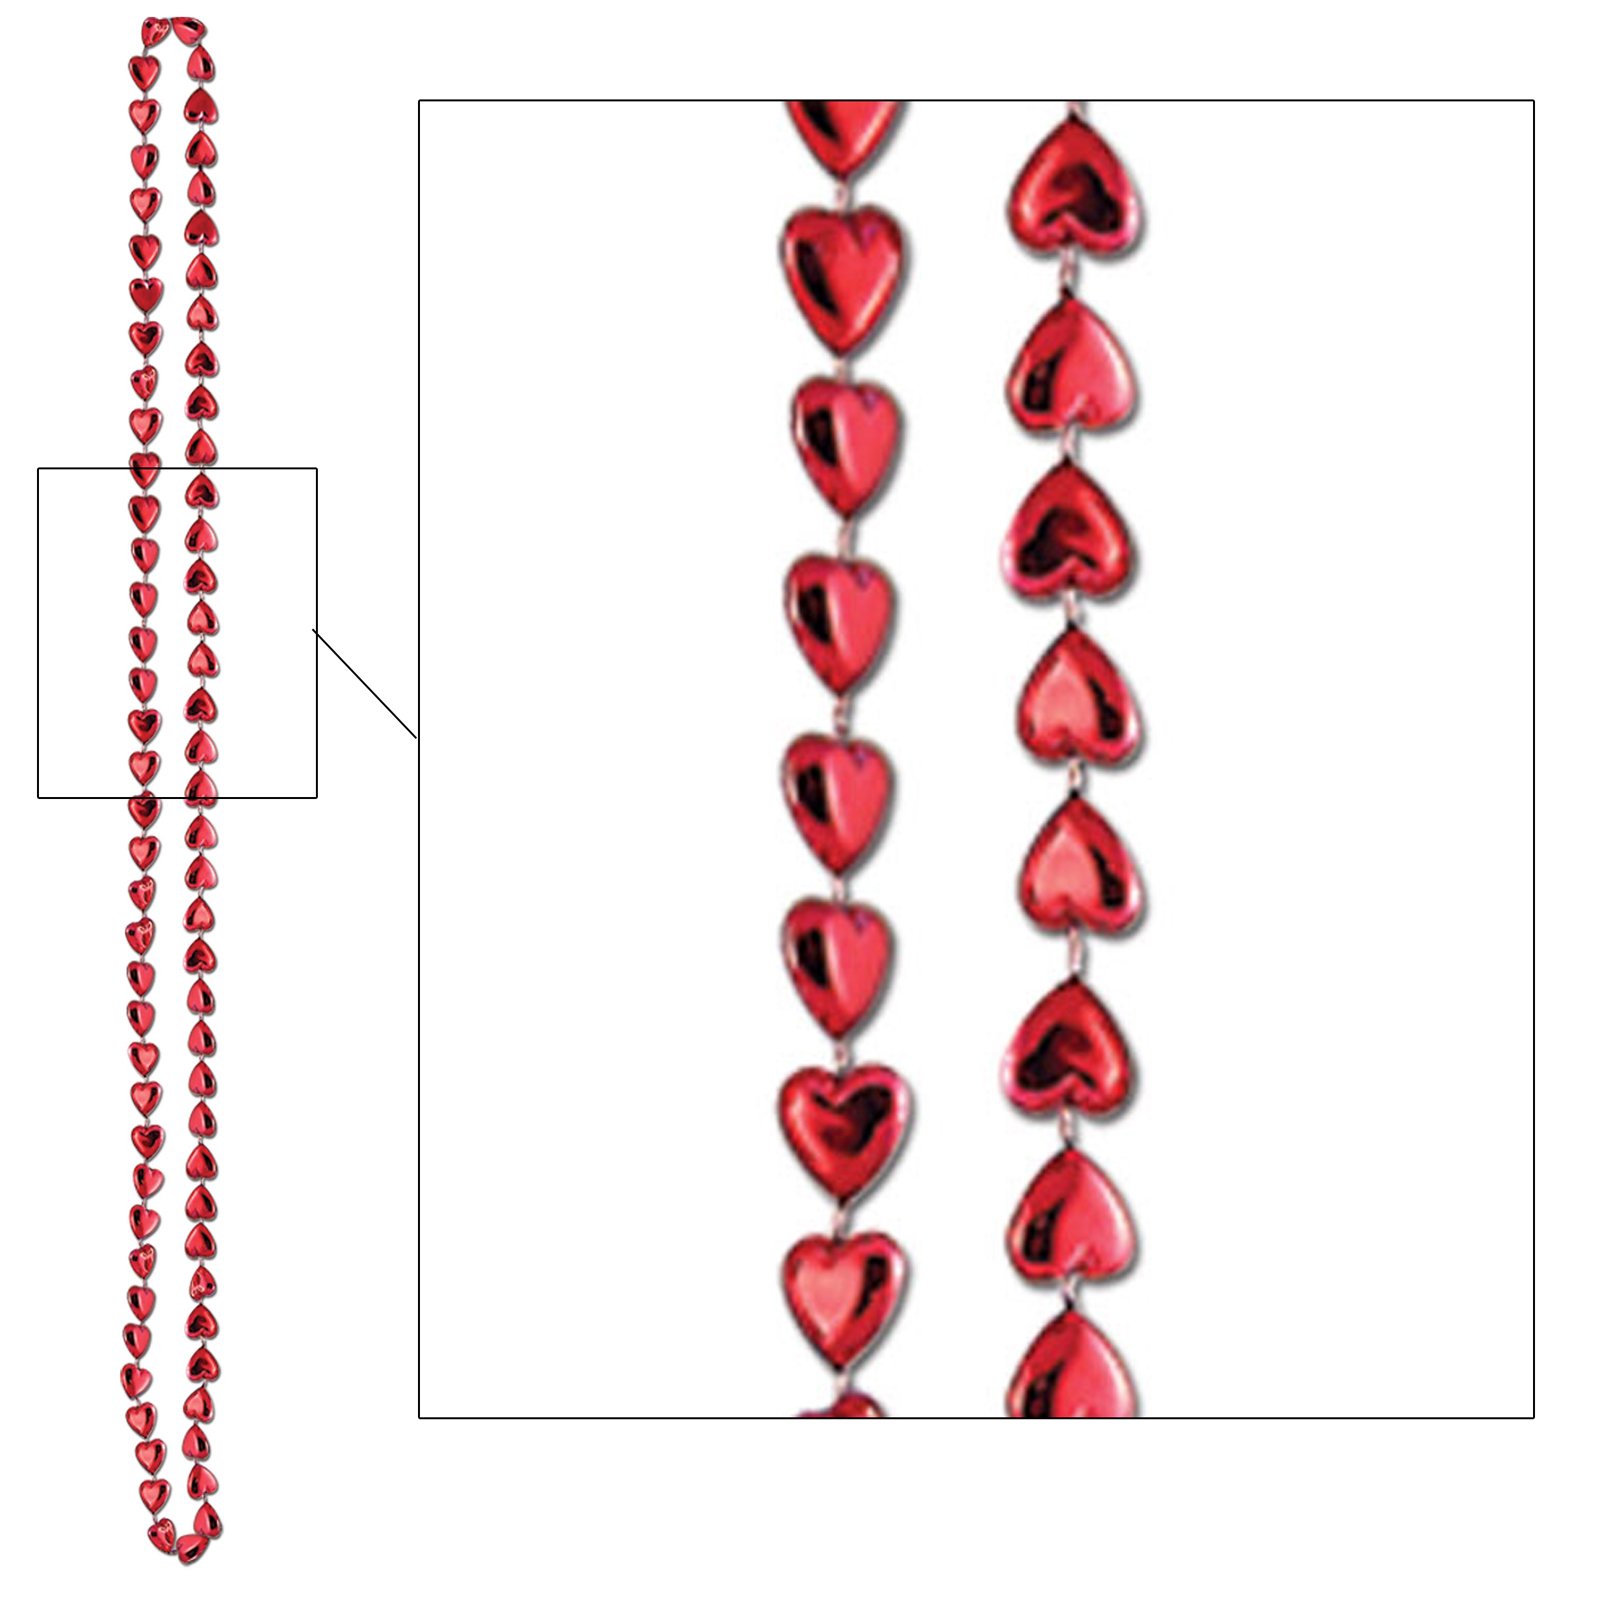 Cinnamon Heart Bead Necklaces (6 count) - Click Image to Close